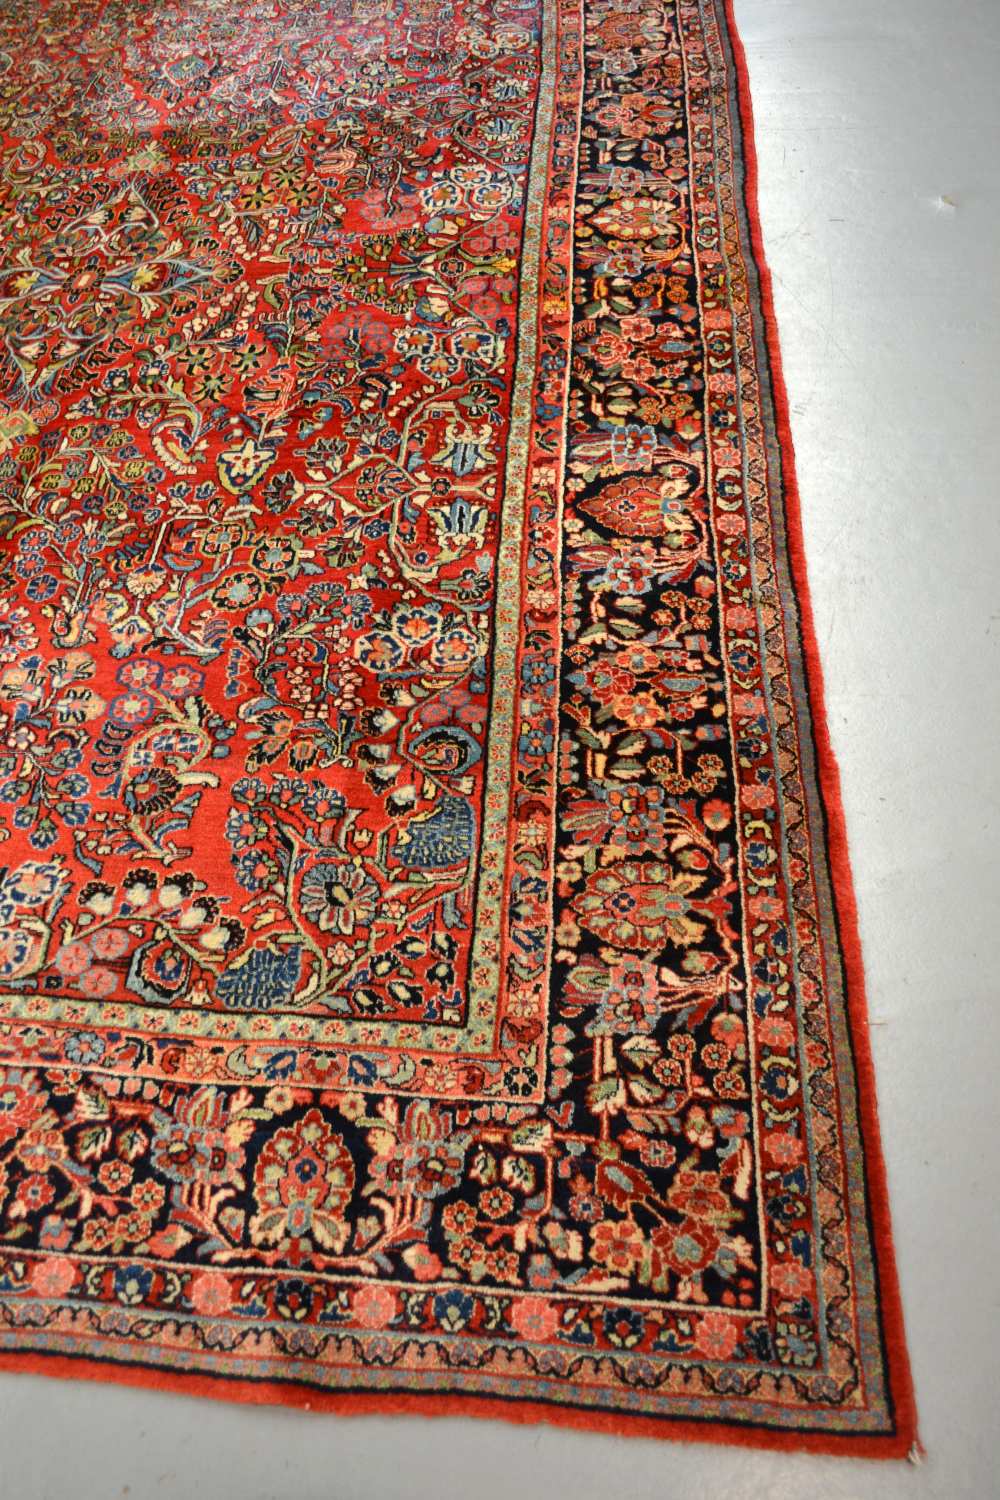 Attractive American Saruk carpet, north west Persia, circa 1930s, 12ft. 4in. x 8ft. 7in. 3.76m. x - Image 2 of 4